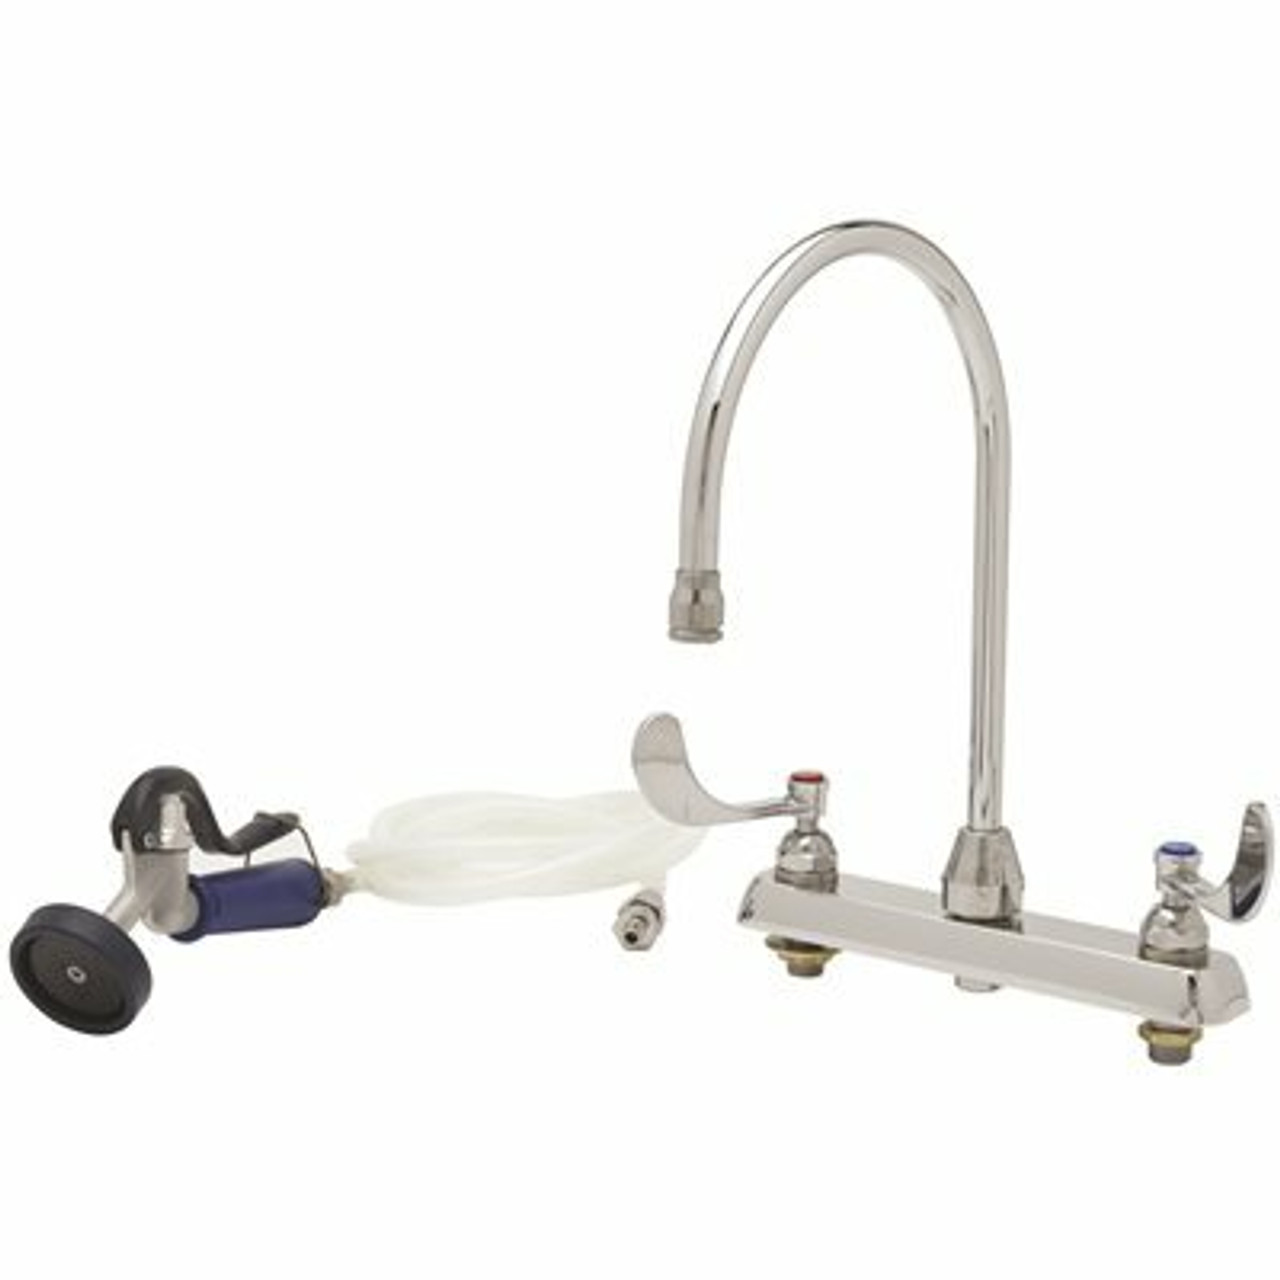 T&S Deck Mount Pet Grooming Mixing Faucet With Side Spray, Wrist Handles, Swivel Nozzle And 7 Ft. Chrome Plated Brass